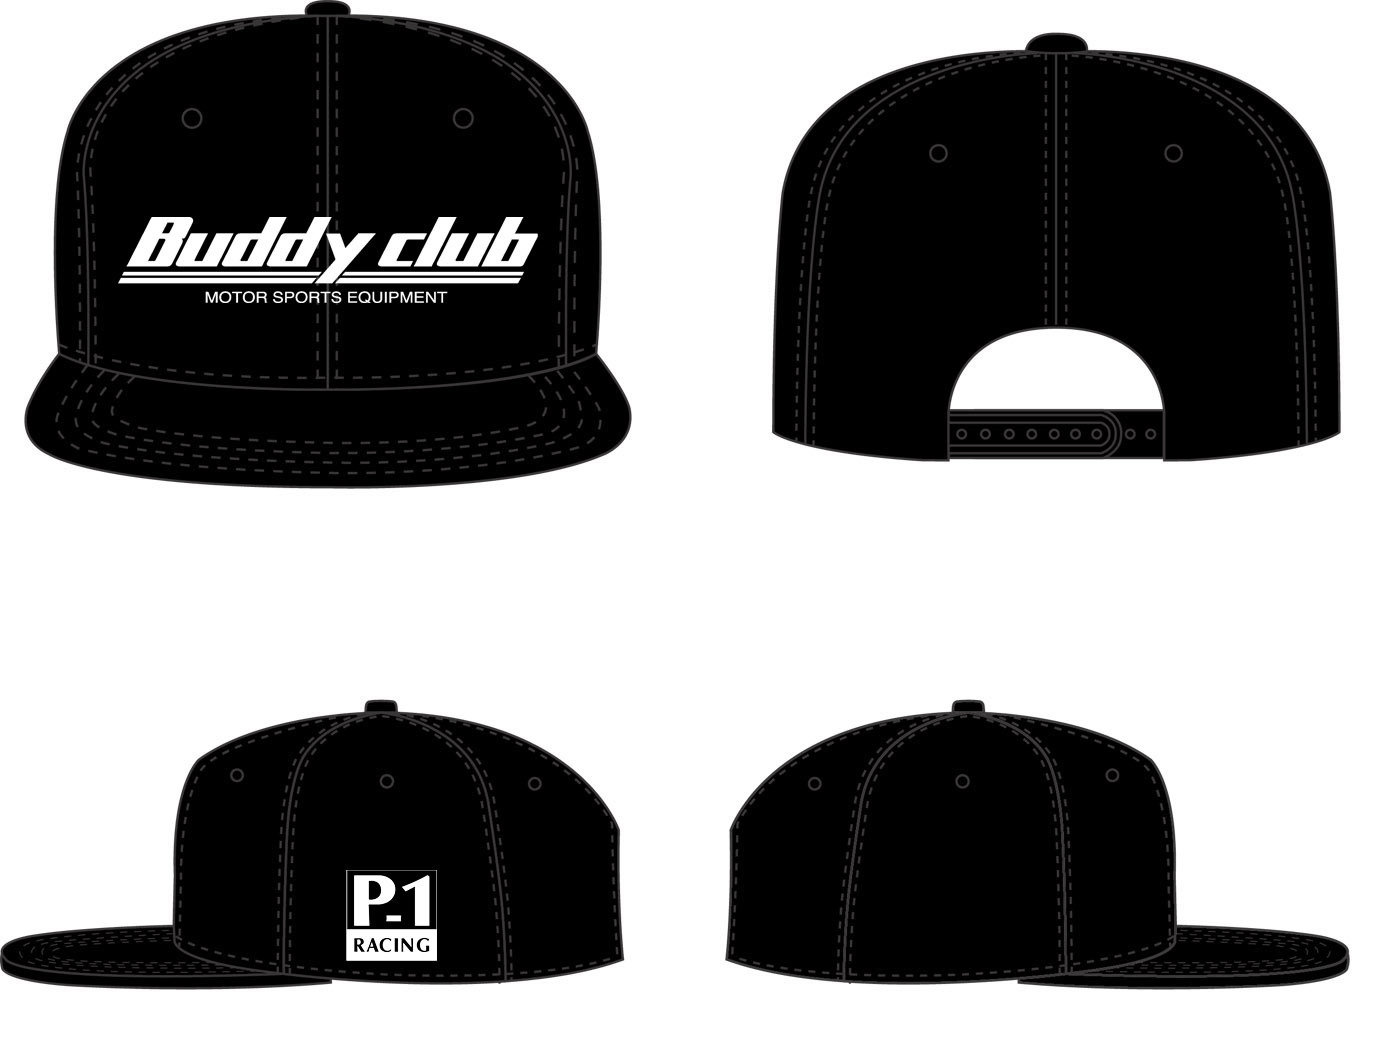 Buddy Club "Classic Style" Snap Back Cap (Limited Edition)